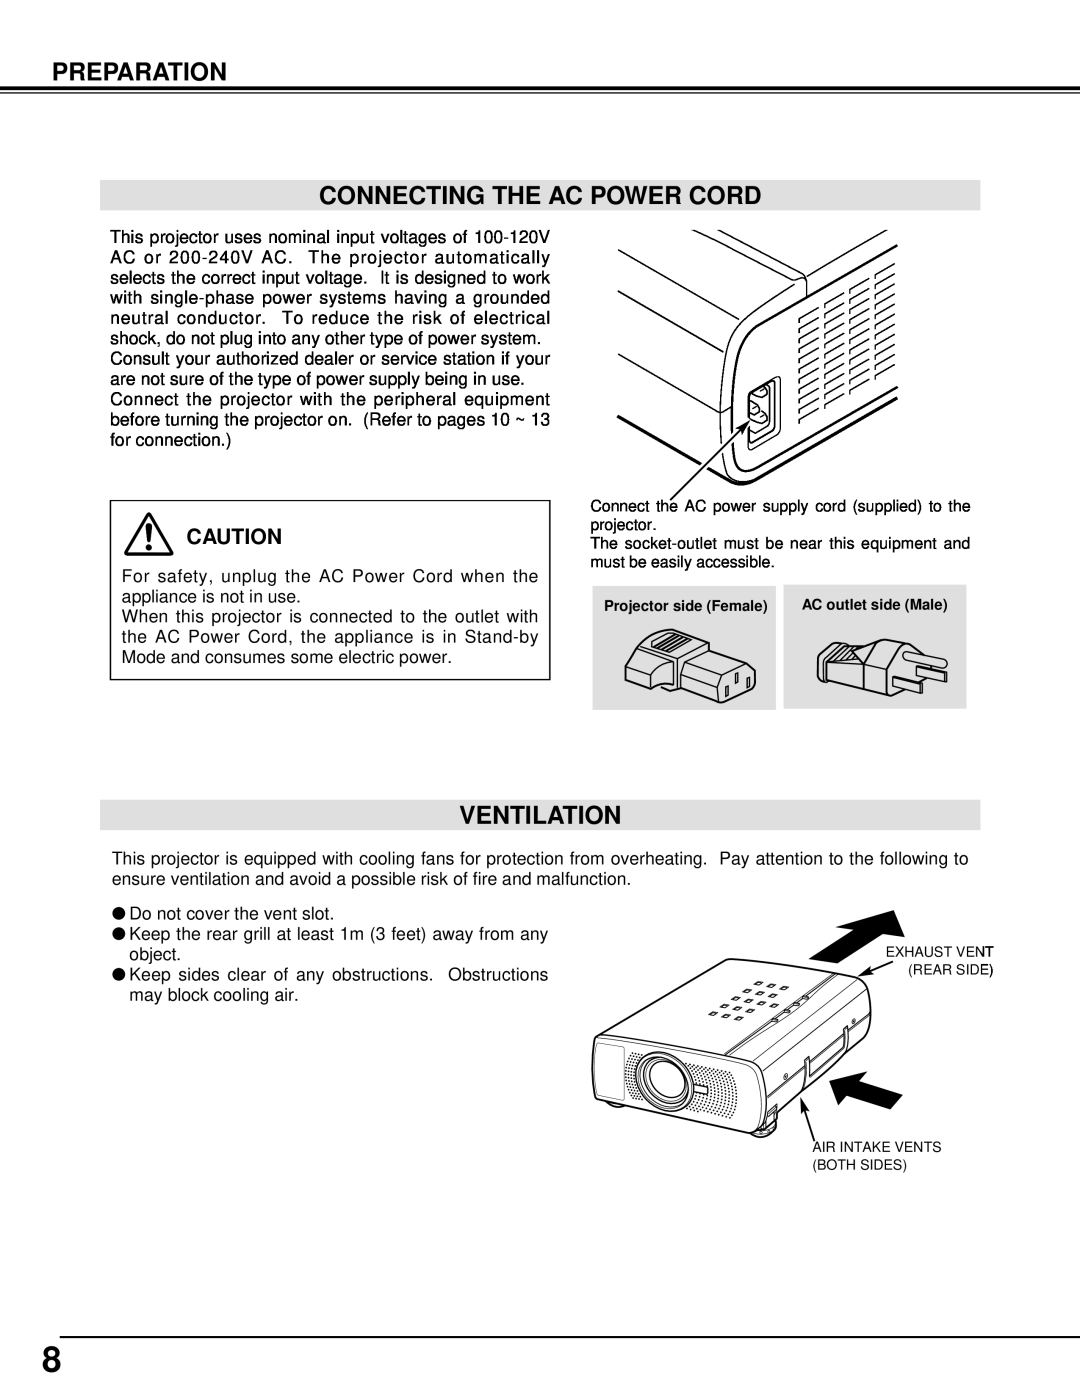 BOXLIGHT CP-33t manual Preparation Connecting The Ac Power Cord, Ventilation 